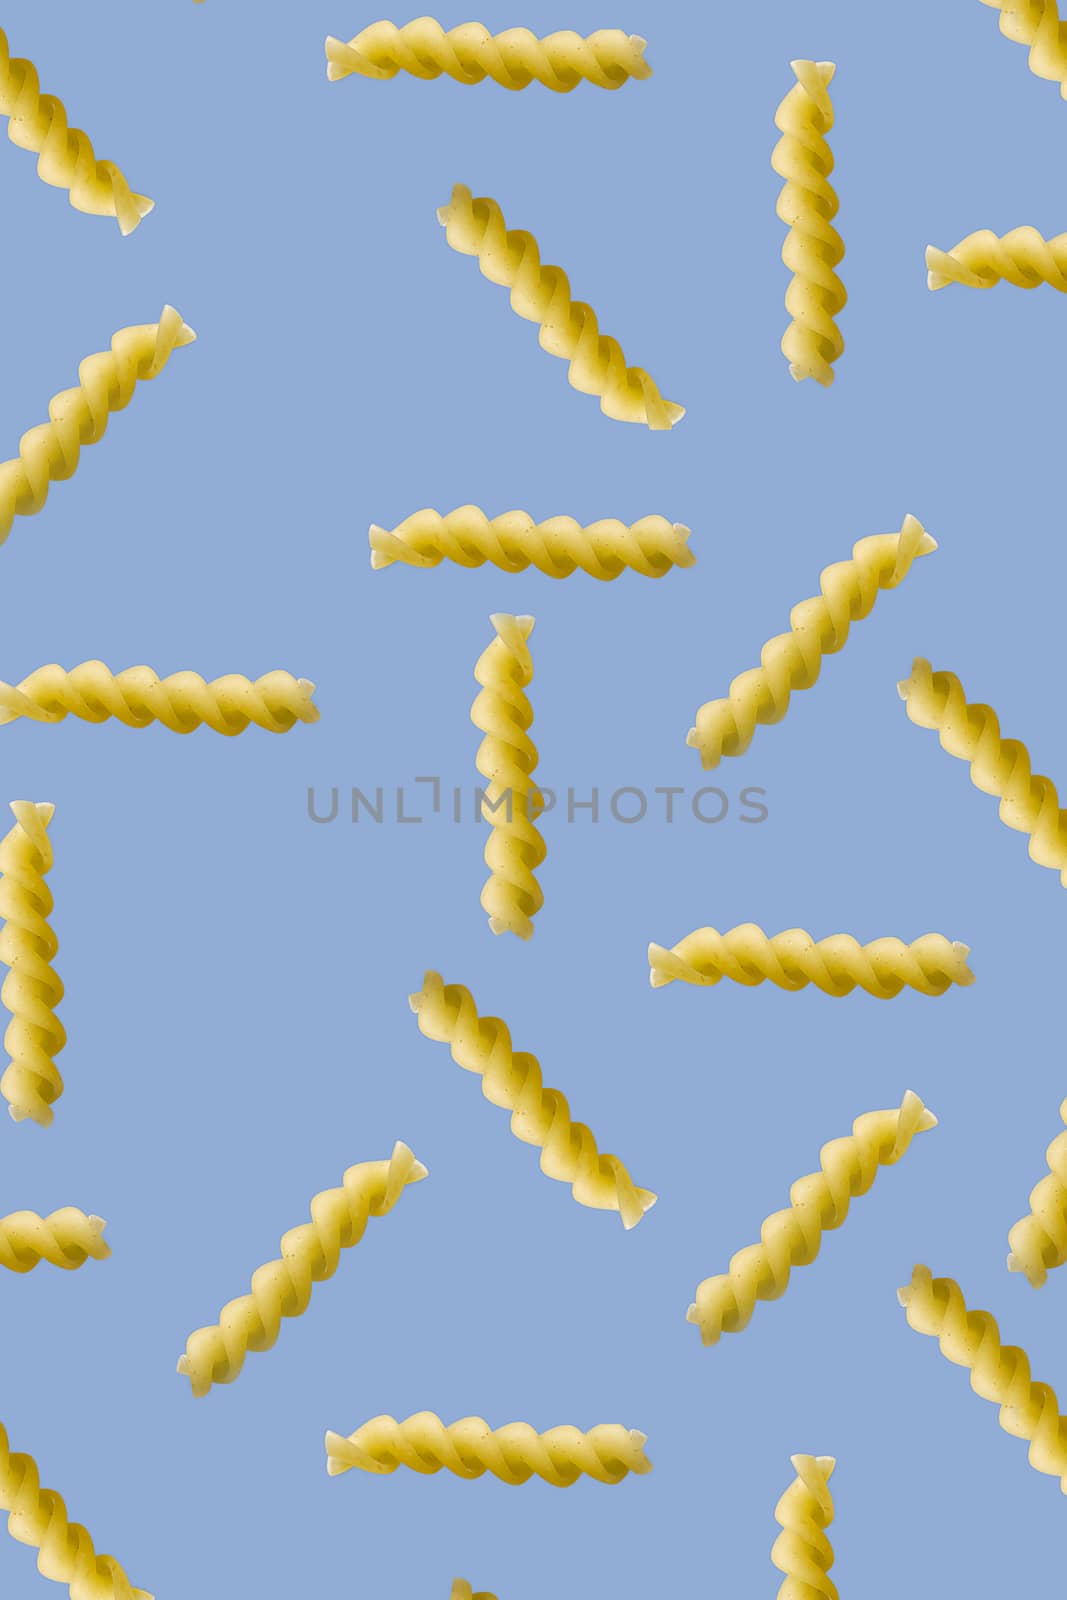 Fusilli pasta random flat lay on blue background without shadow. can be used as raw pasta background, poster, banner not pattern. by PhotoTime